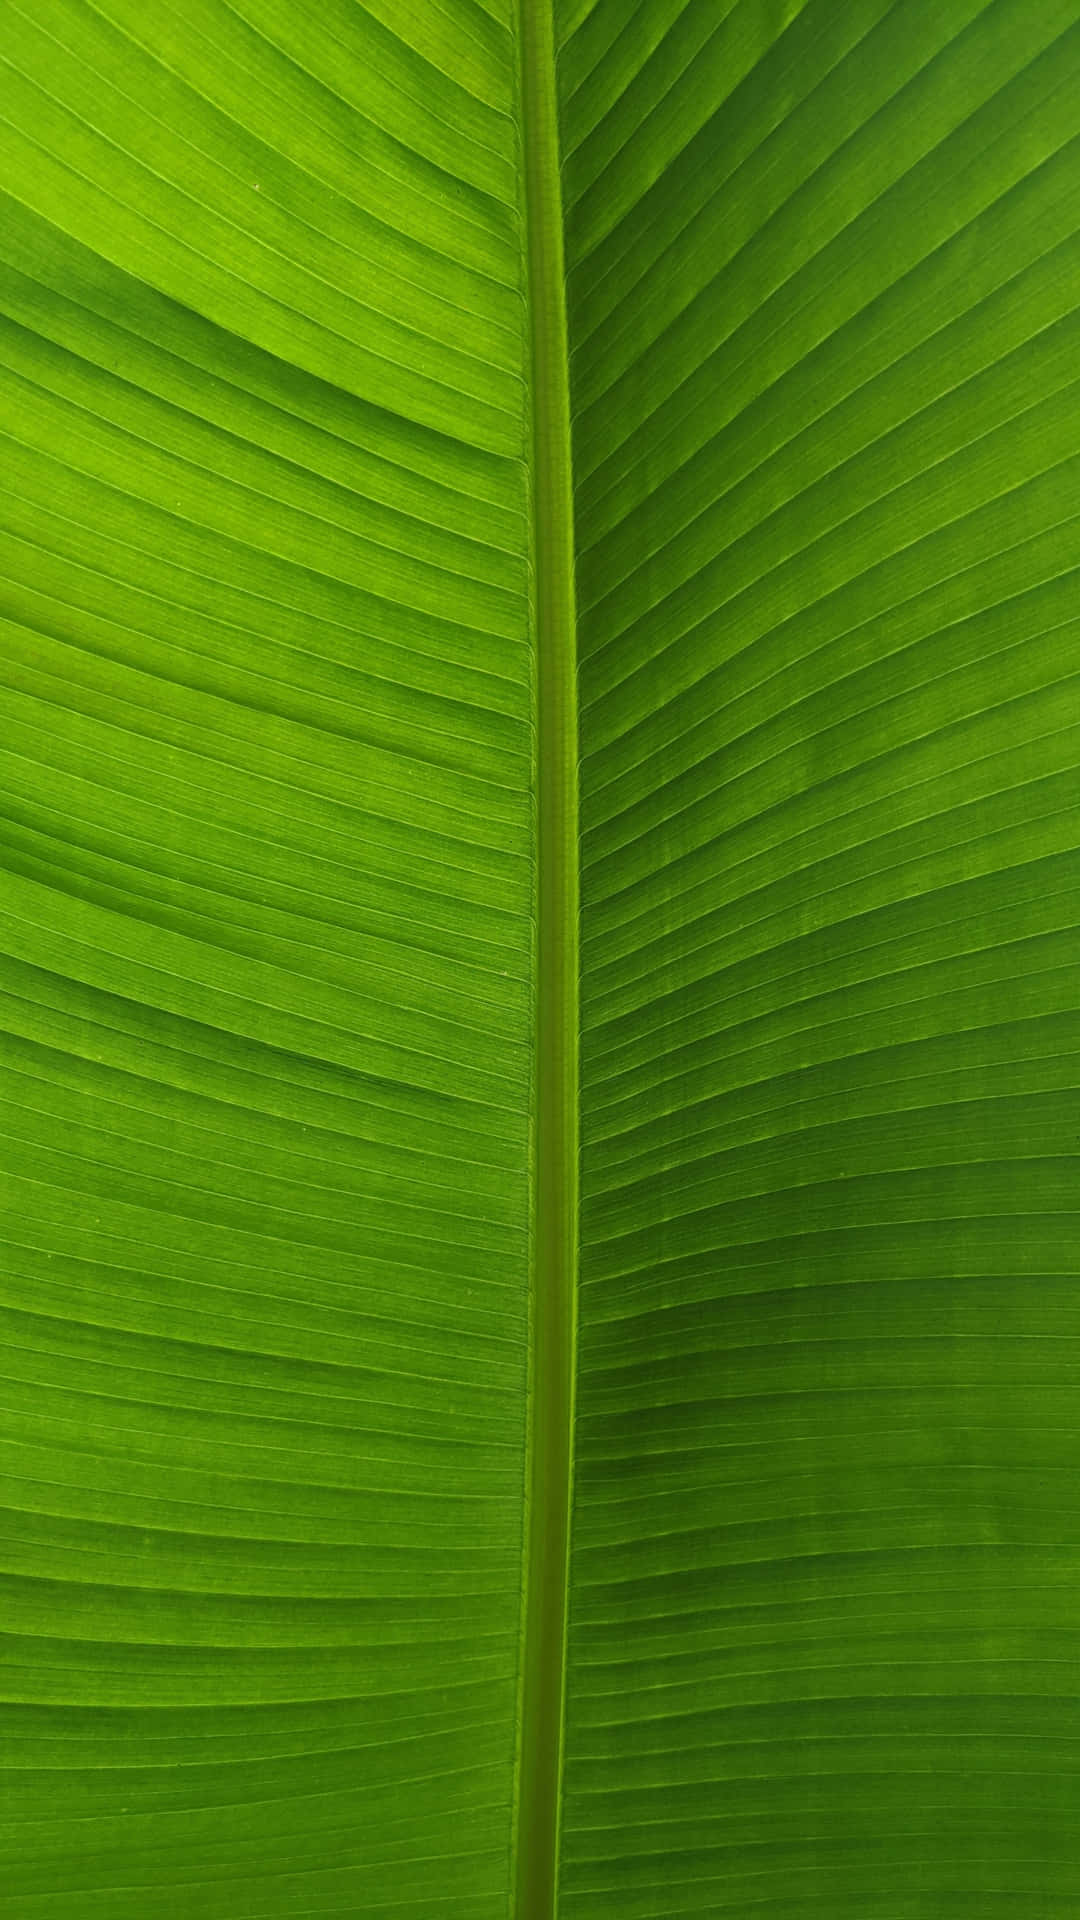 Go green with a natural banana leaf background